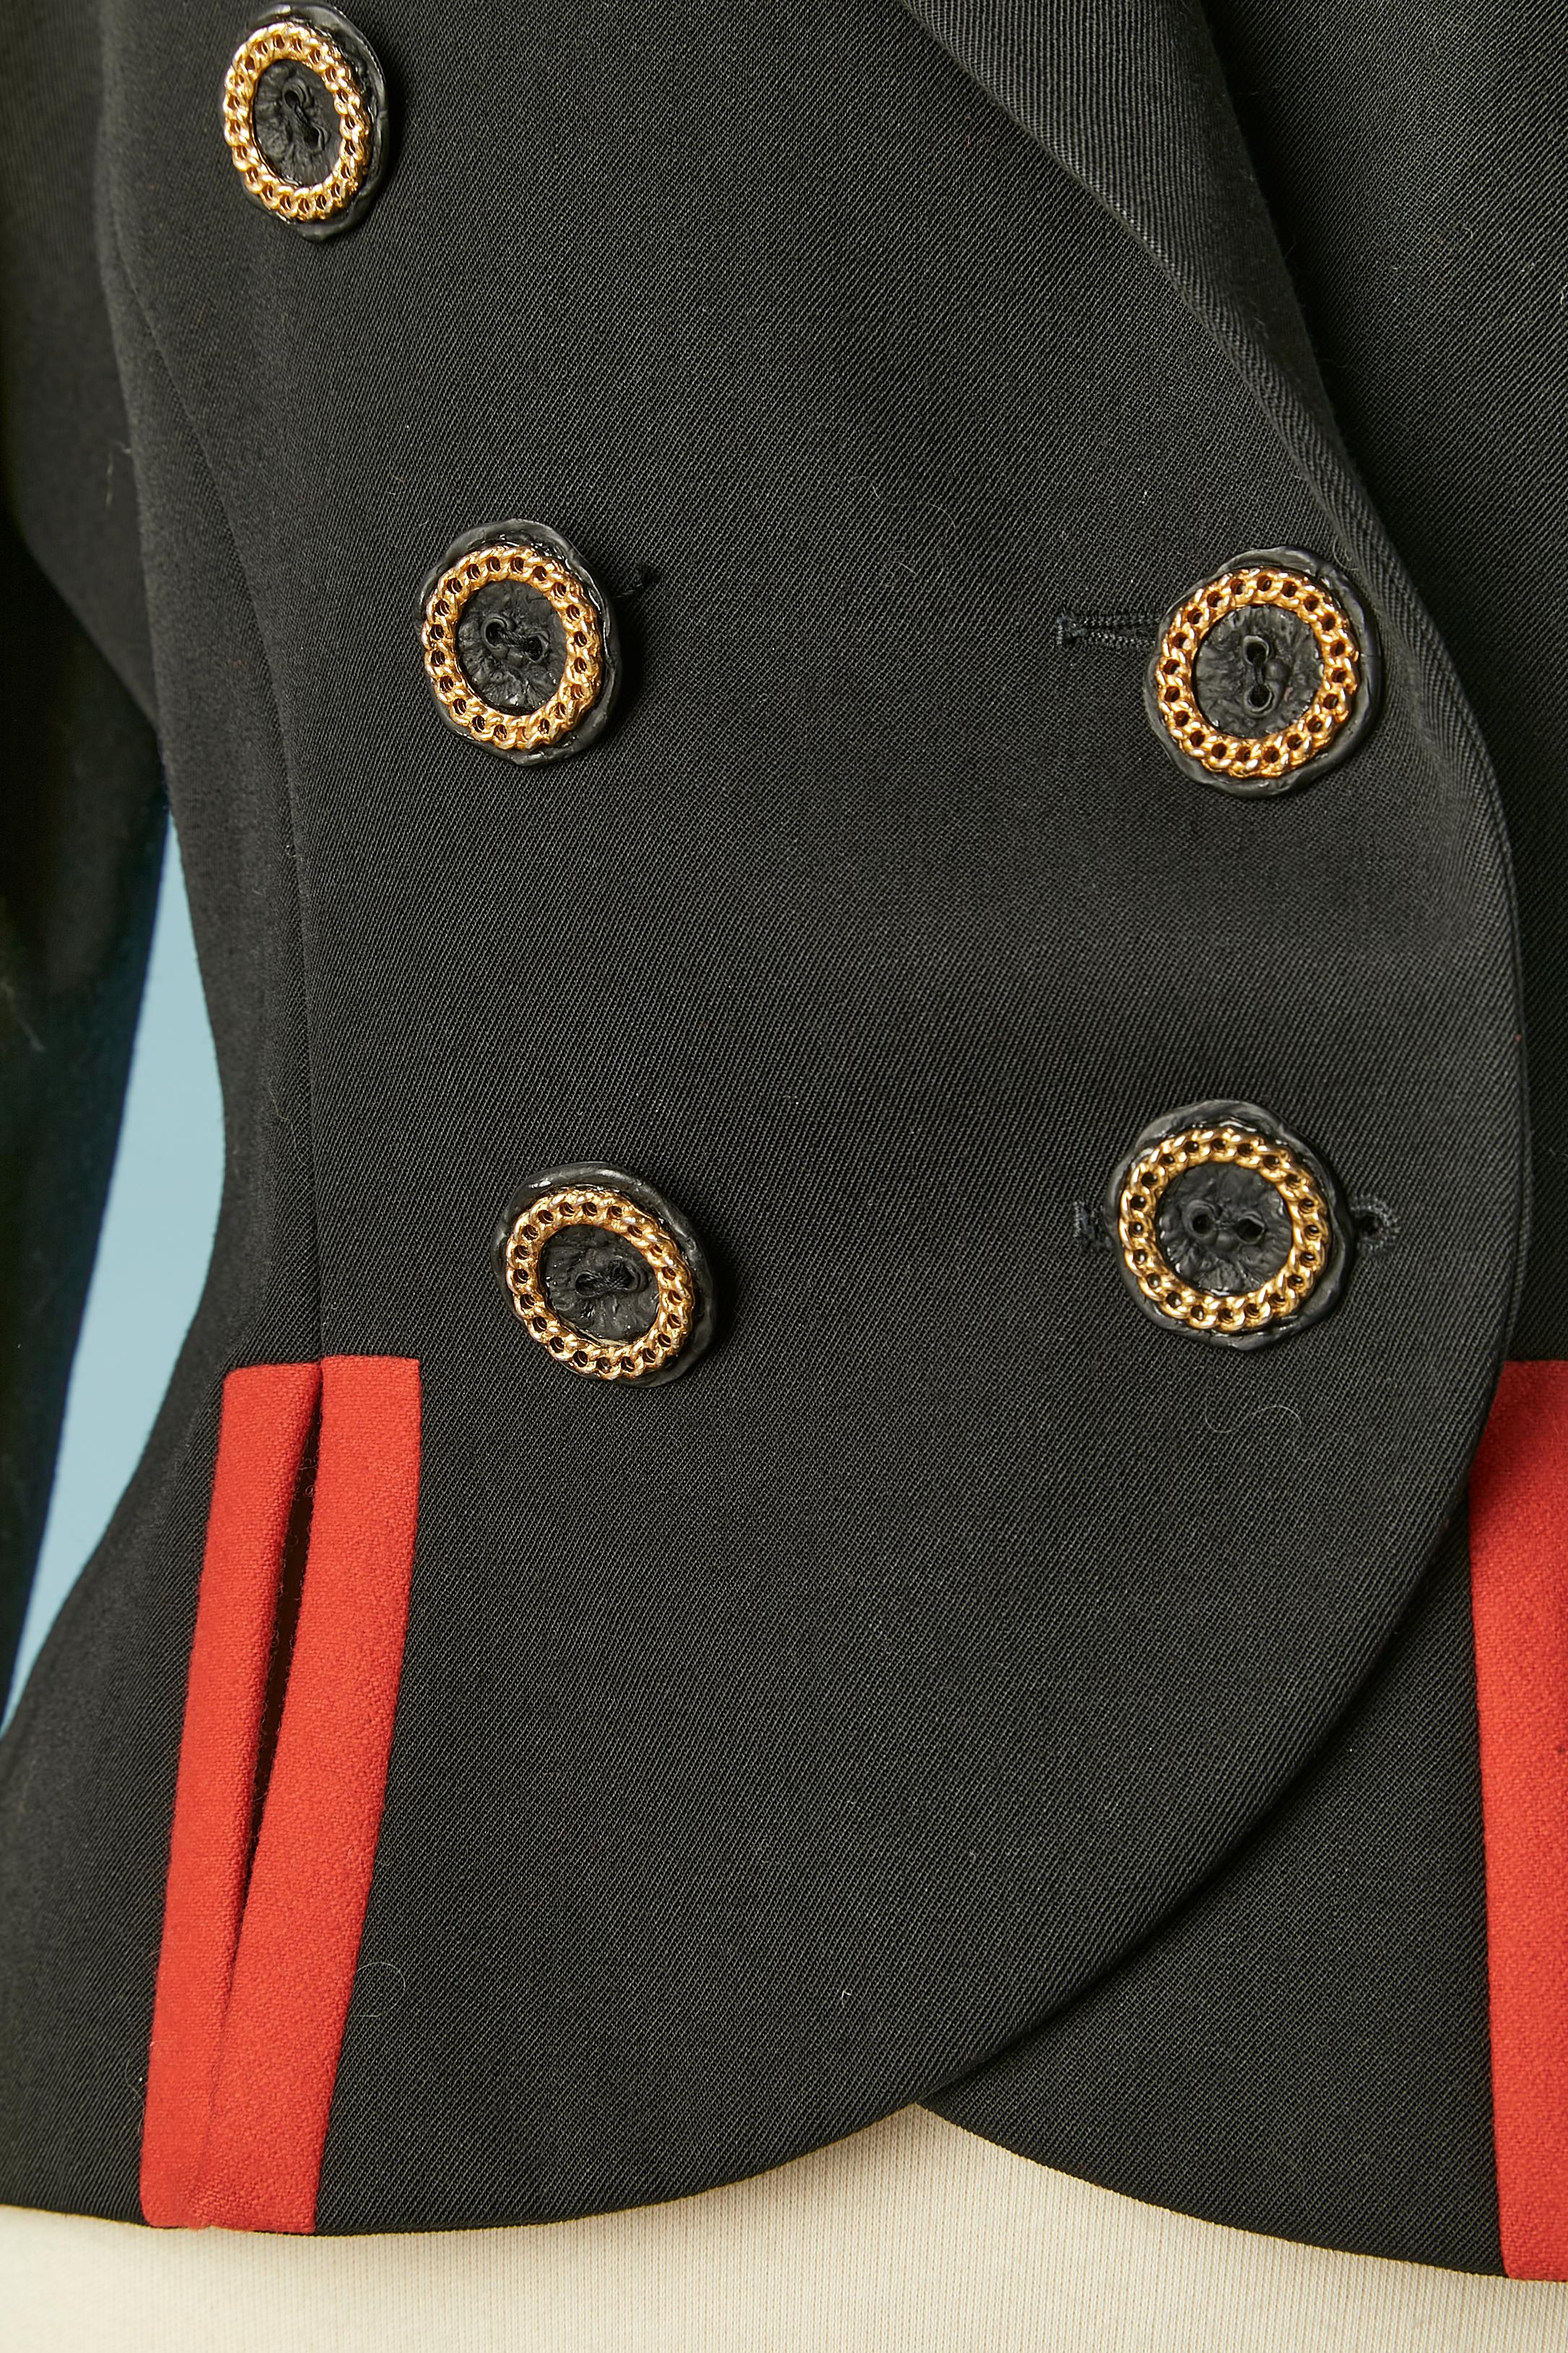 Black double-breasted jacket with gold buttons and red details Lolita Lempicka  In Excellent Condition For Sale In Saint-Ouen-Sur-Seine, FR